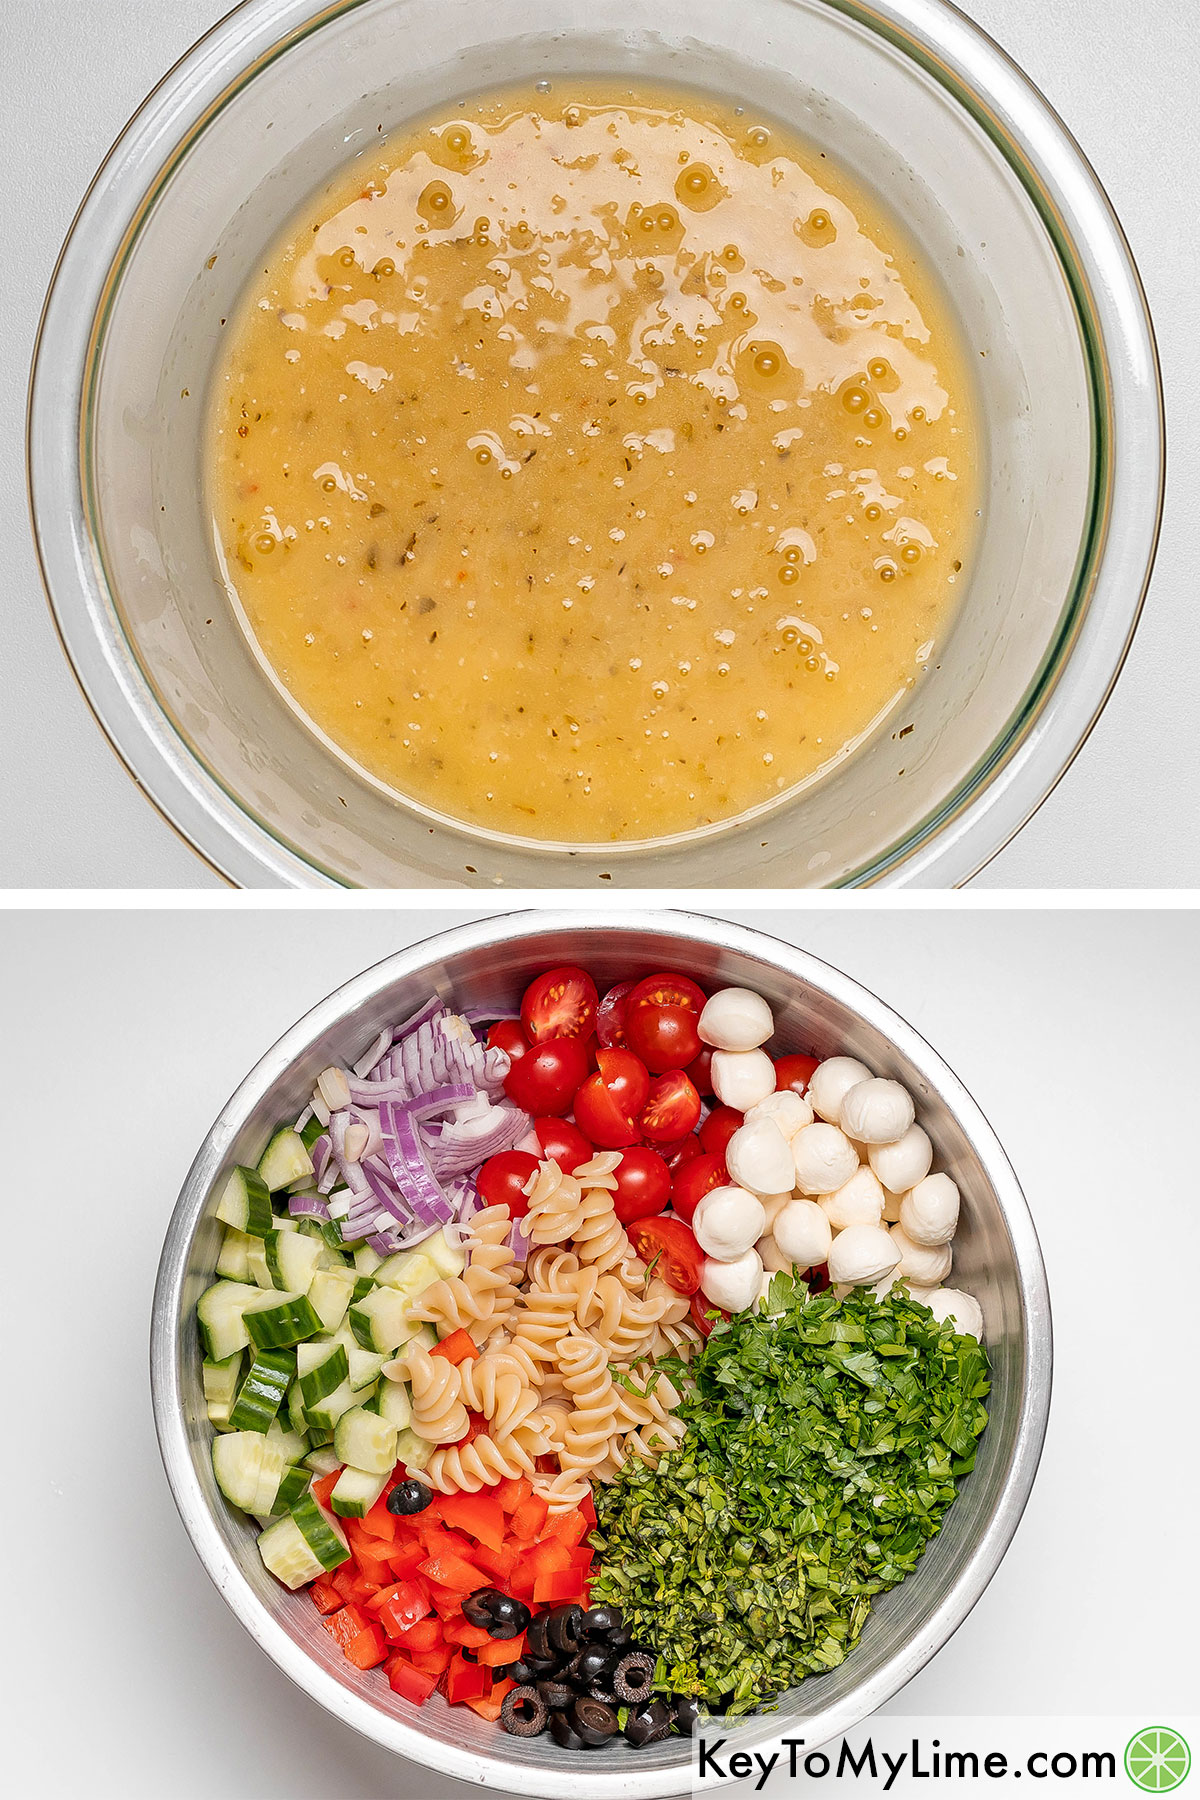 Mixing honey, lemon juice and dressing together then adding to the vegetables and cooked pasta and mixing in a large mixing bowl.